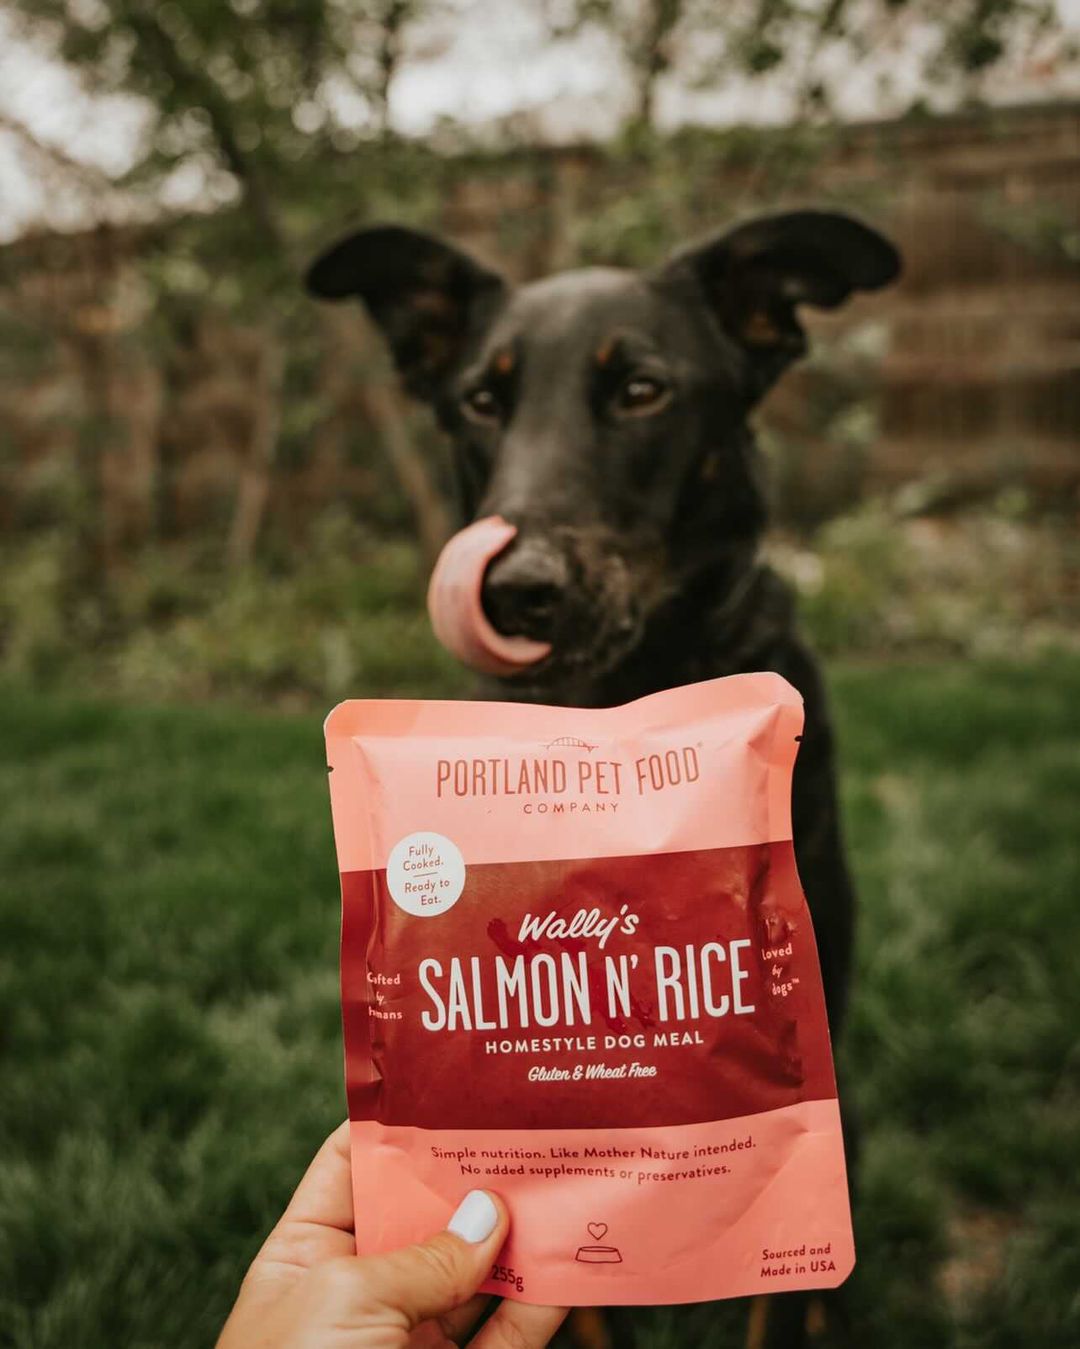 Is Grain-Free Dog Food Good For Dogs?